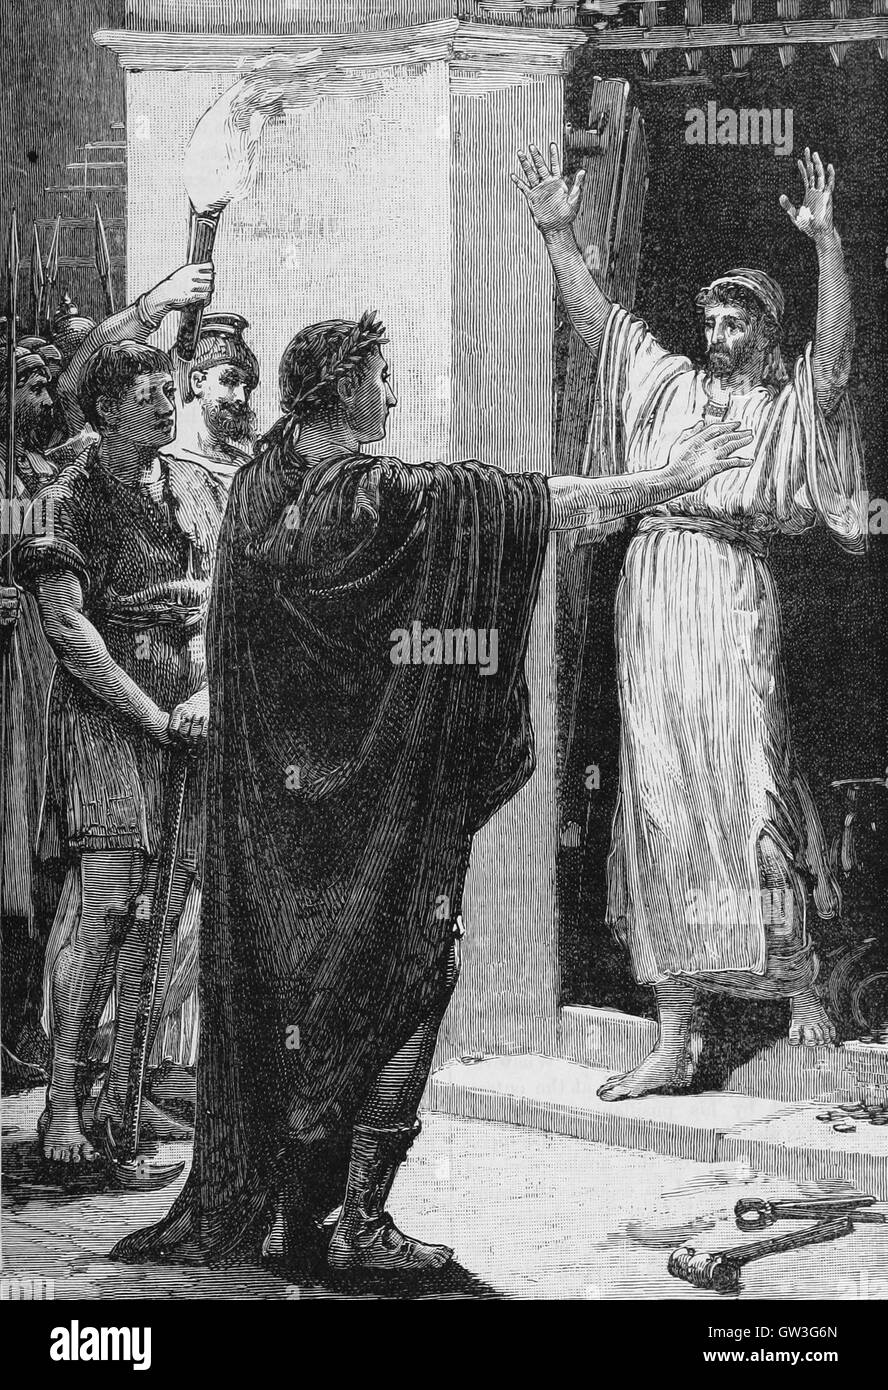 Julius Caesar possessing himself of the treasure in the Temple of Saturn.  Gaius Julius Caesar, known as Julius Caesar, was a Roman politician, general, and notable author of Latin prose. He played a critical role in the events that led to the demise of the Roman Republic and the rise of the Roman Empire. Image sourced from Cassell's Illustrated Universal History (1893). Stock Photo